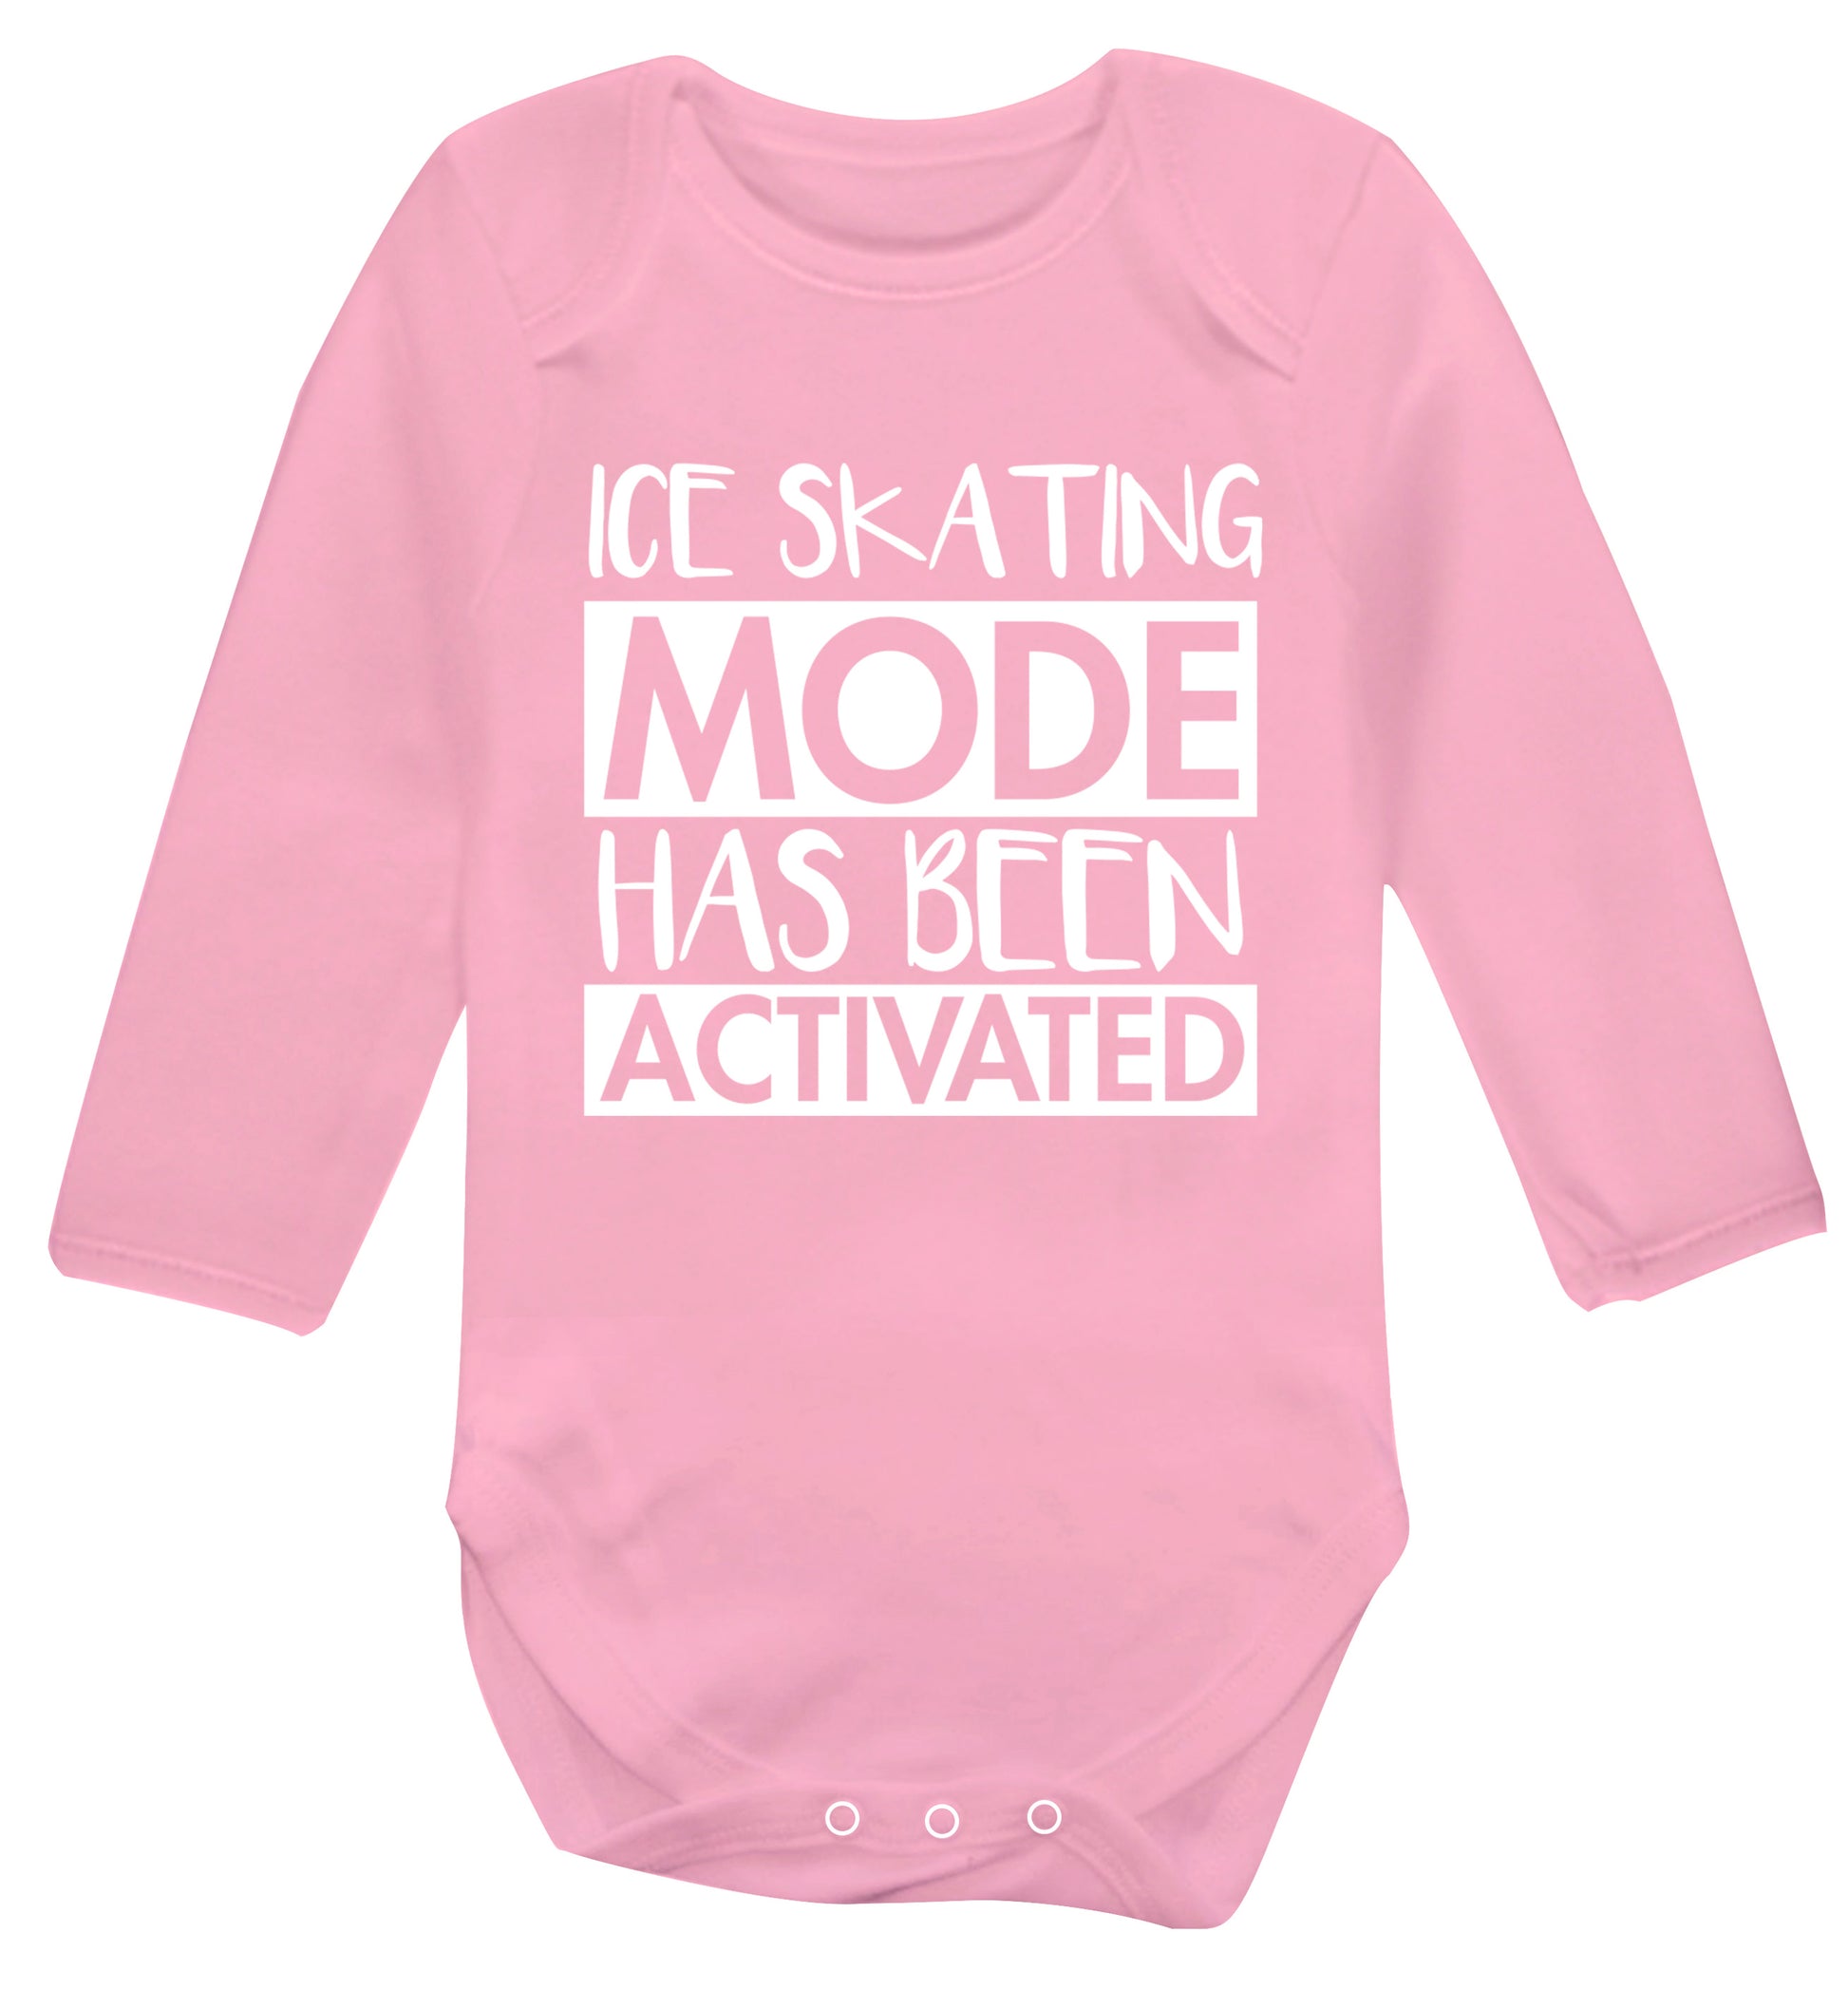 Ice skating mode activated Baby Vest long sleeved pale pink 6-12 months